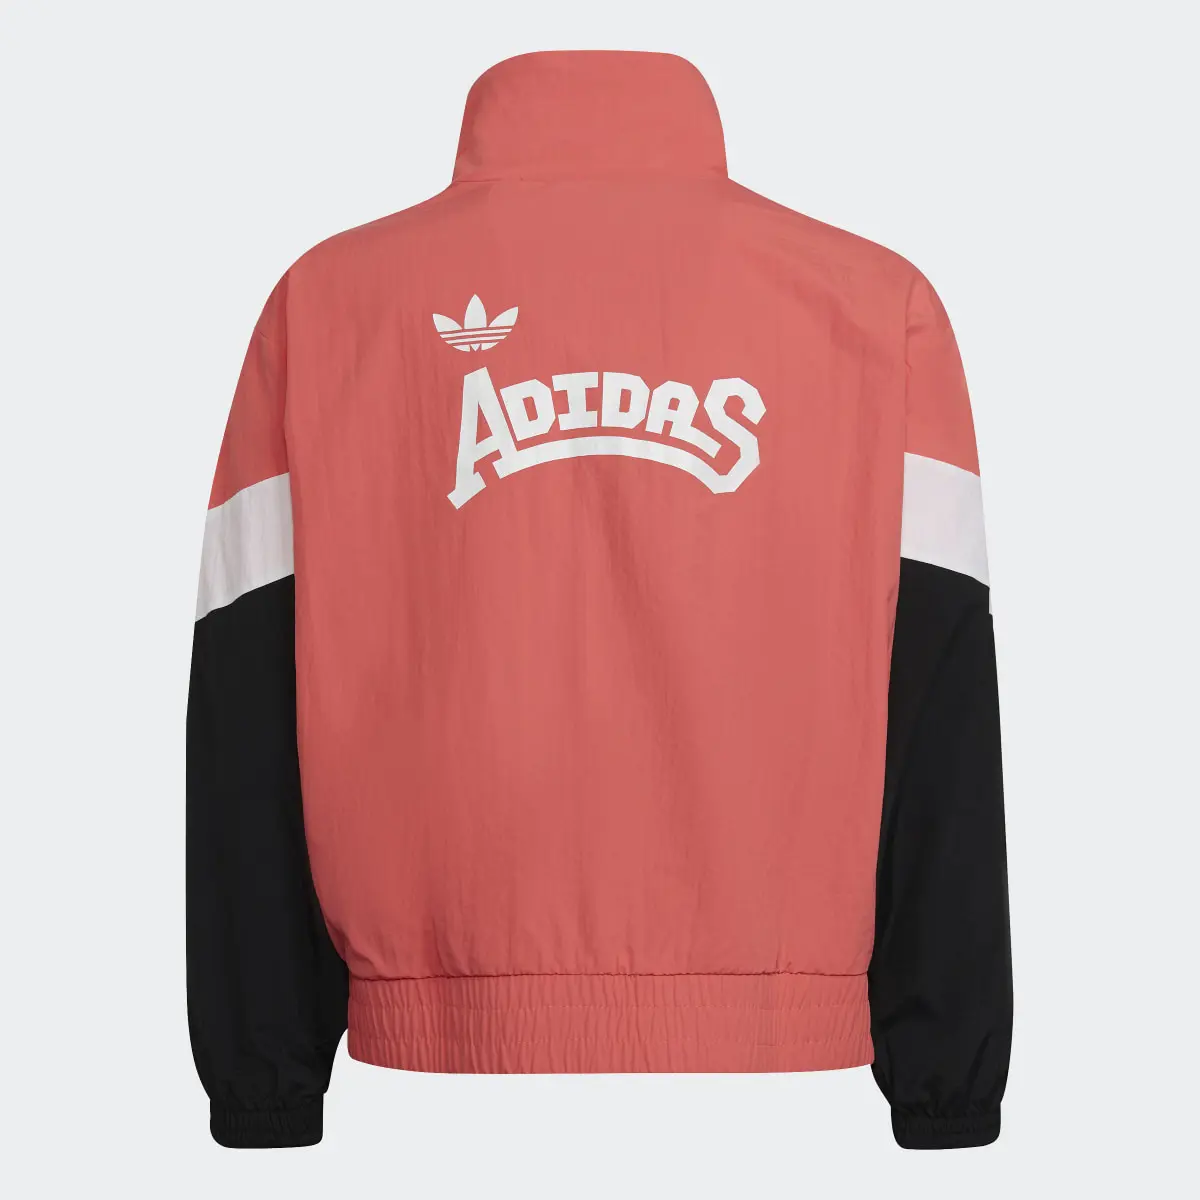 Adidas Woven Track Top. 2